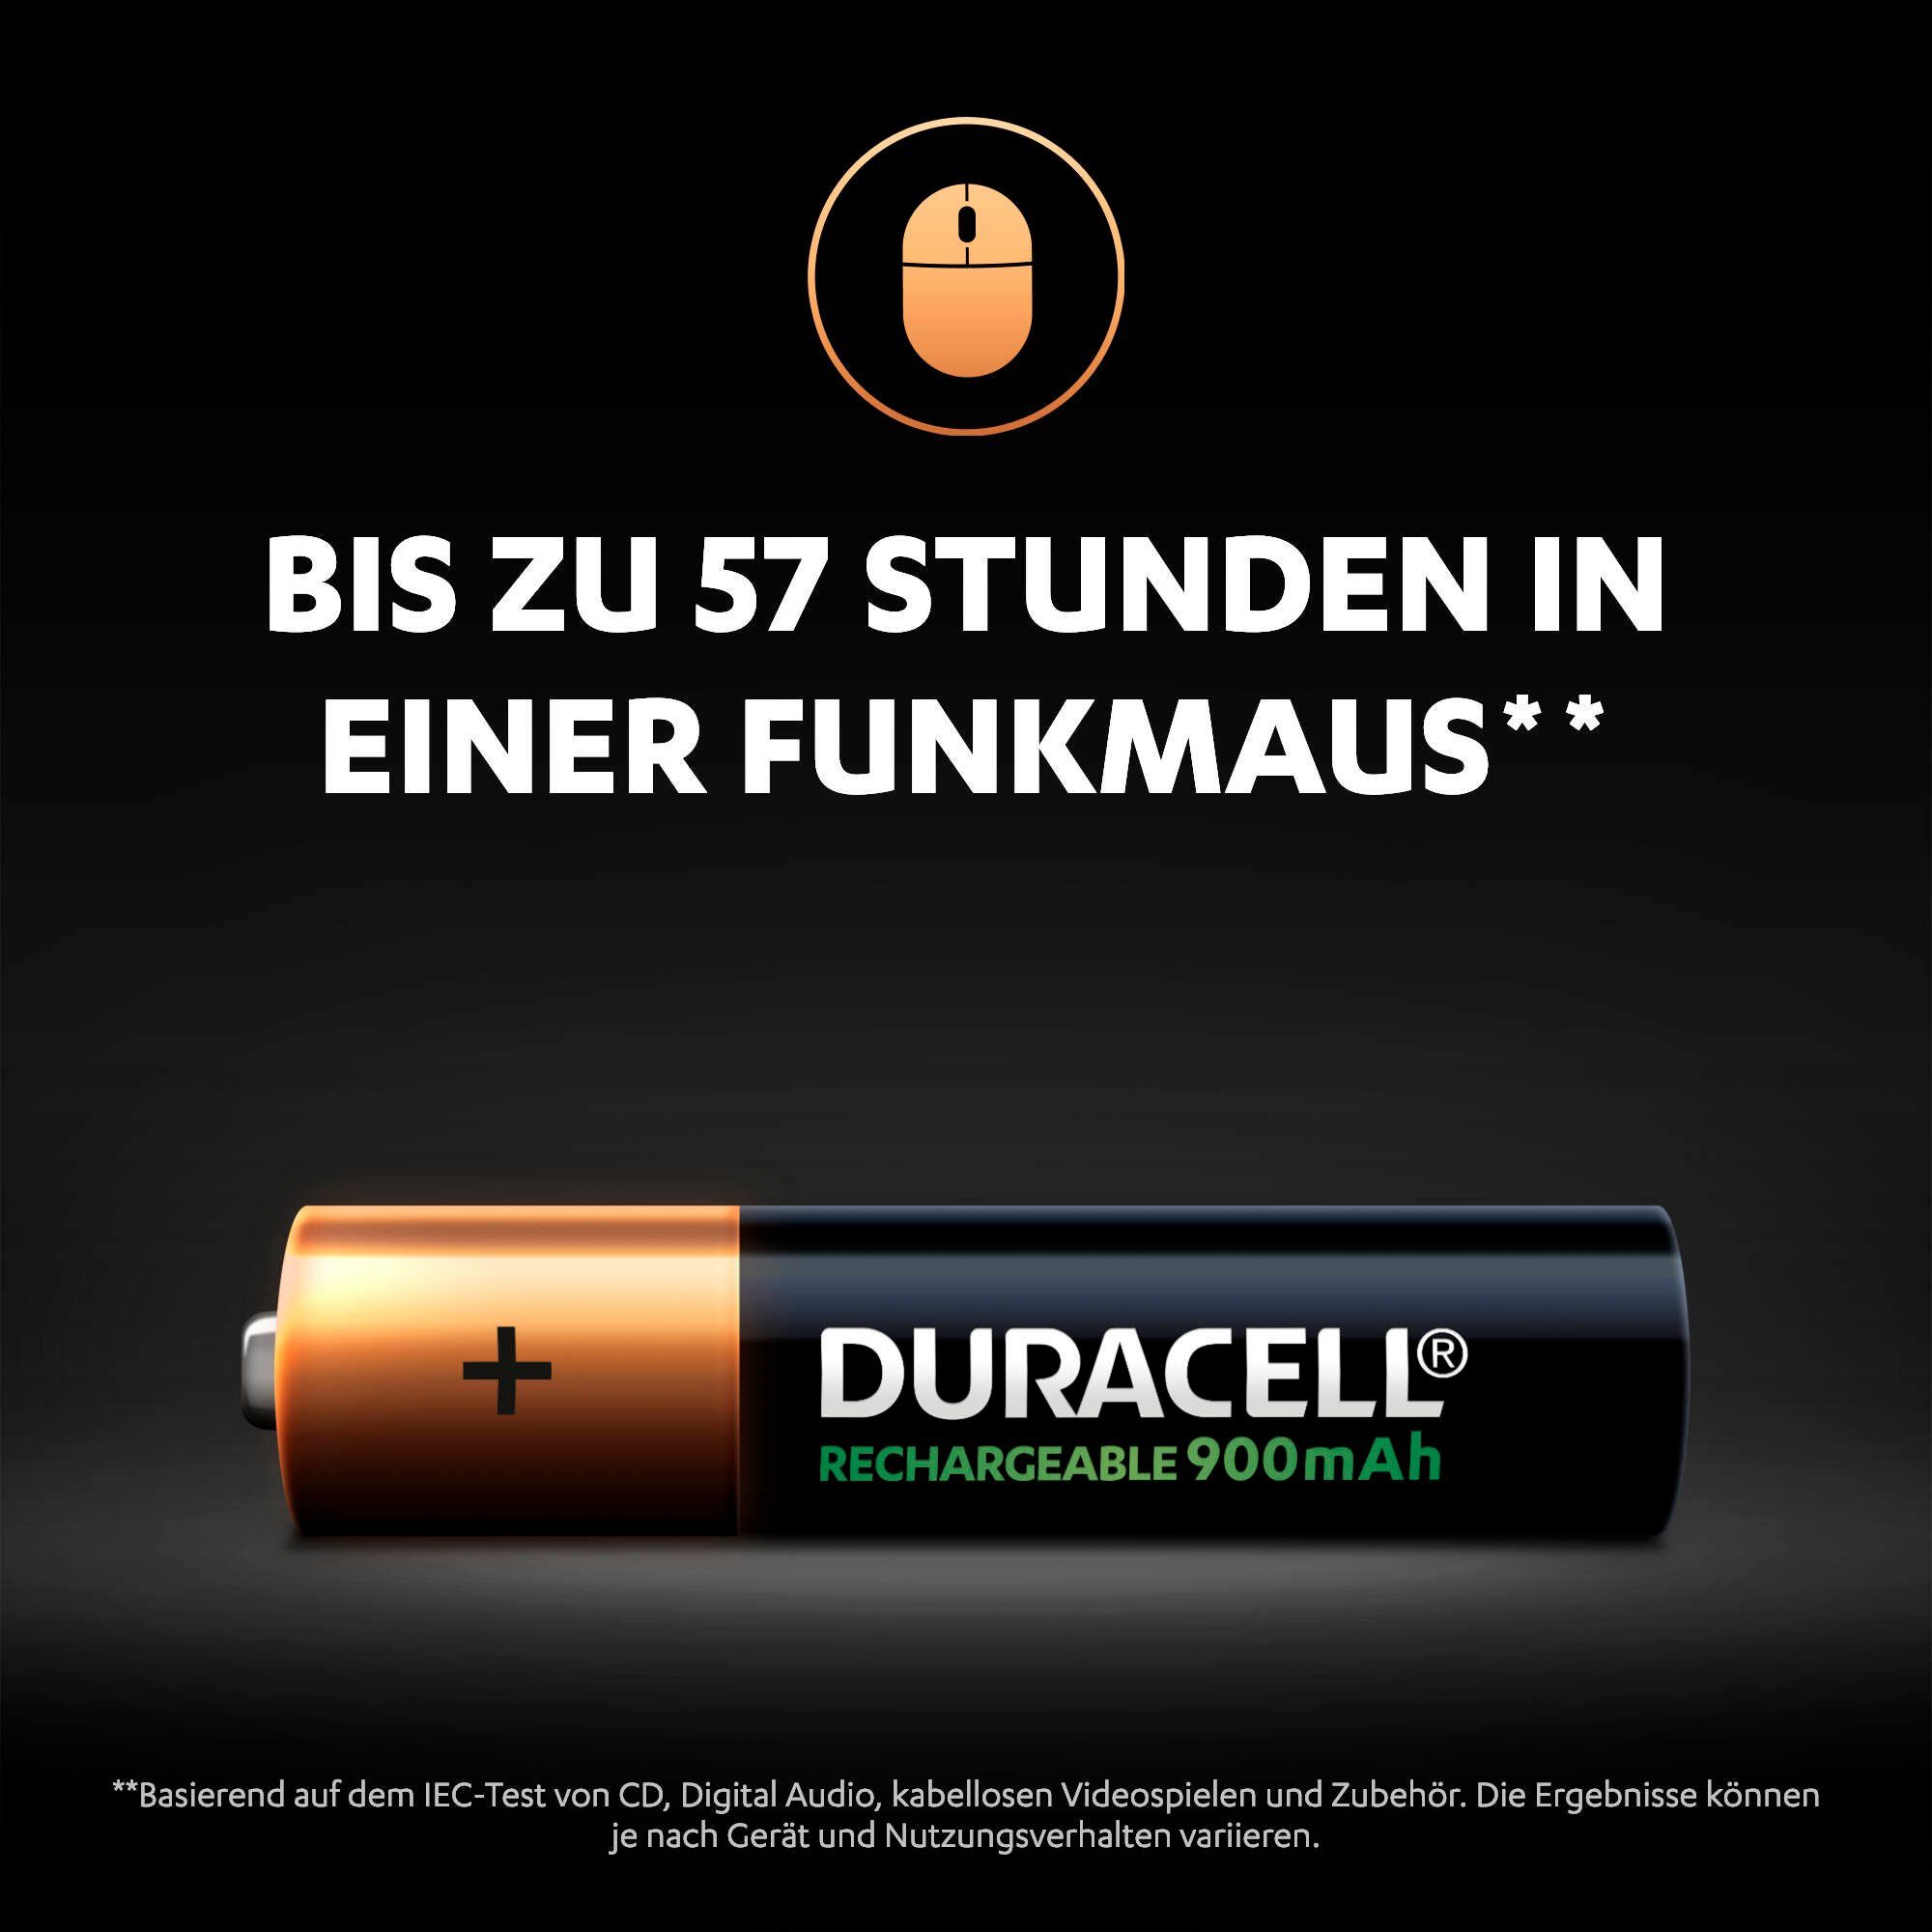 Rechargeable 900mAh 4er Duracell St) (4 Batterie, AAA Pack